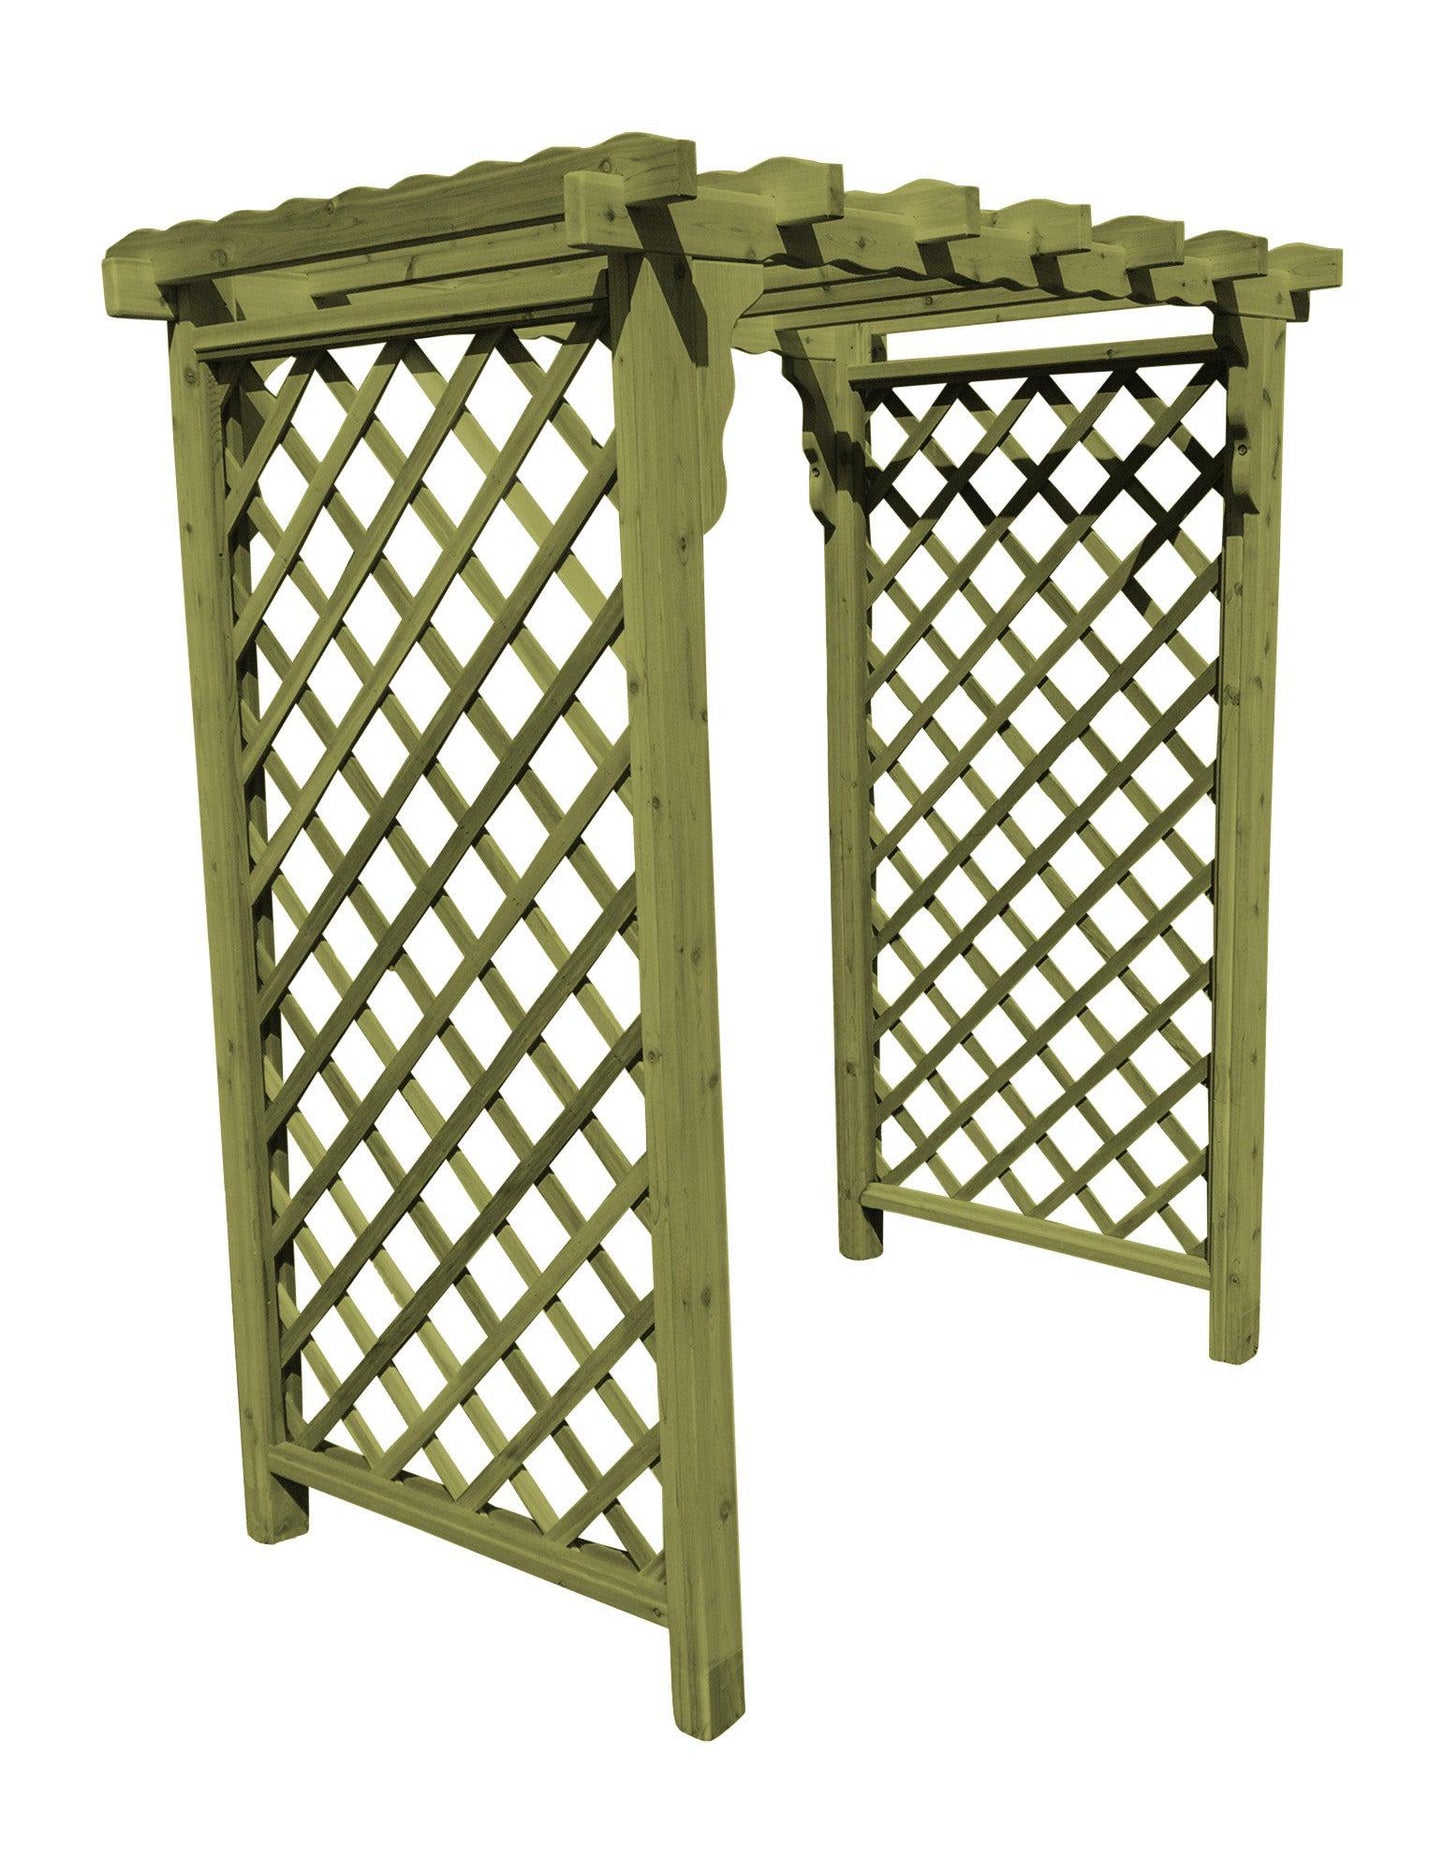 A&L Furniture Co. Western Red Cedar 6' Covington Arbor - LEAD TIME TO SHIP 4 WEEKS OR LESS